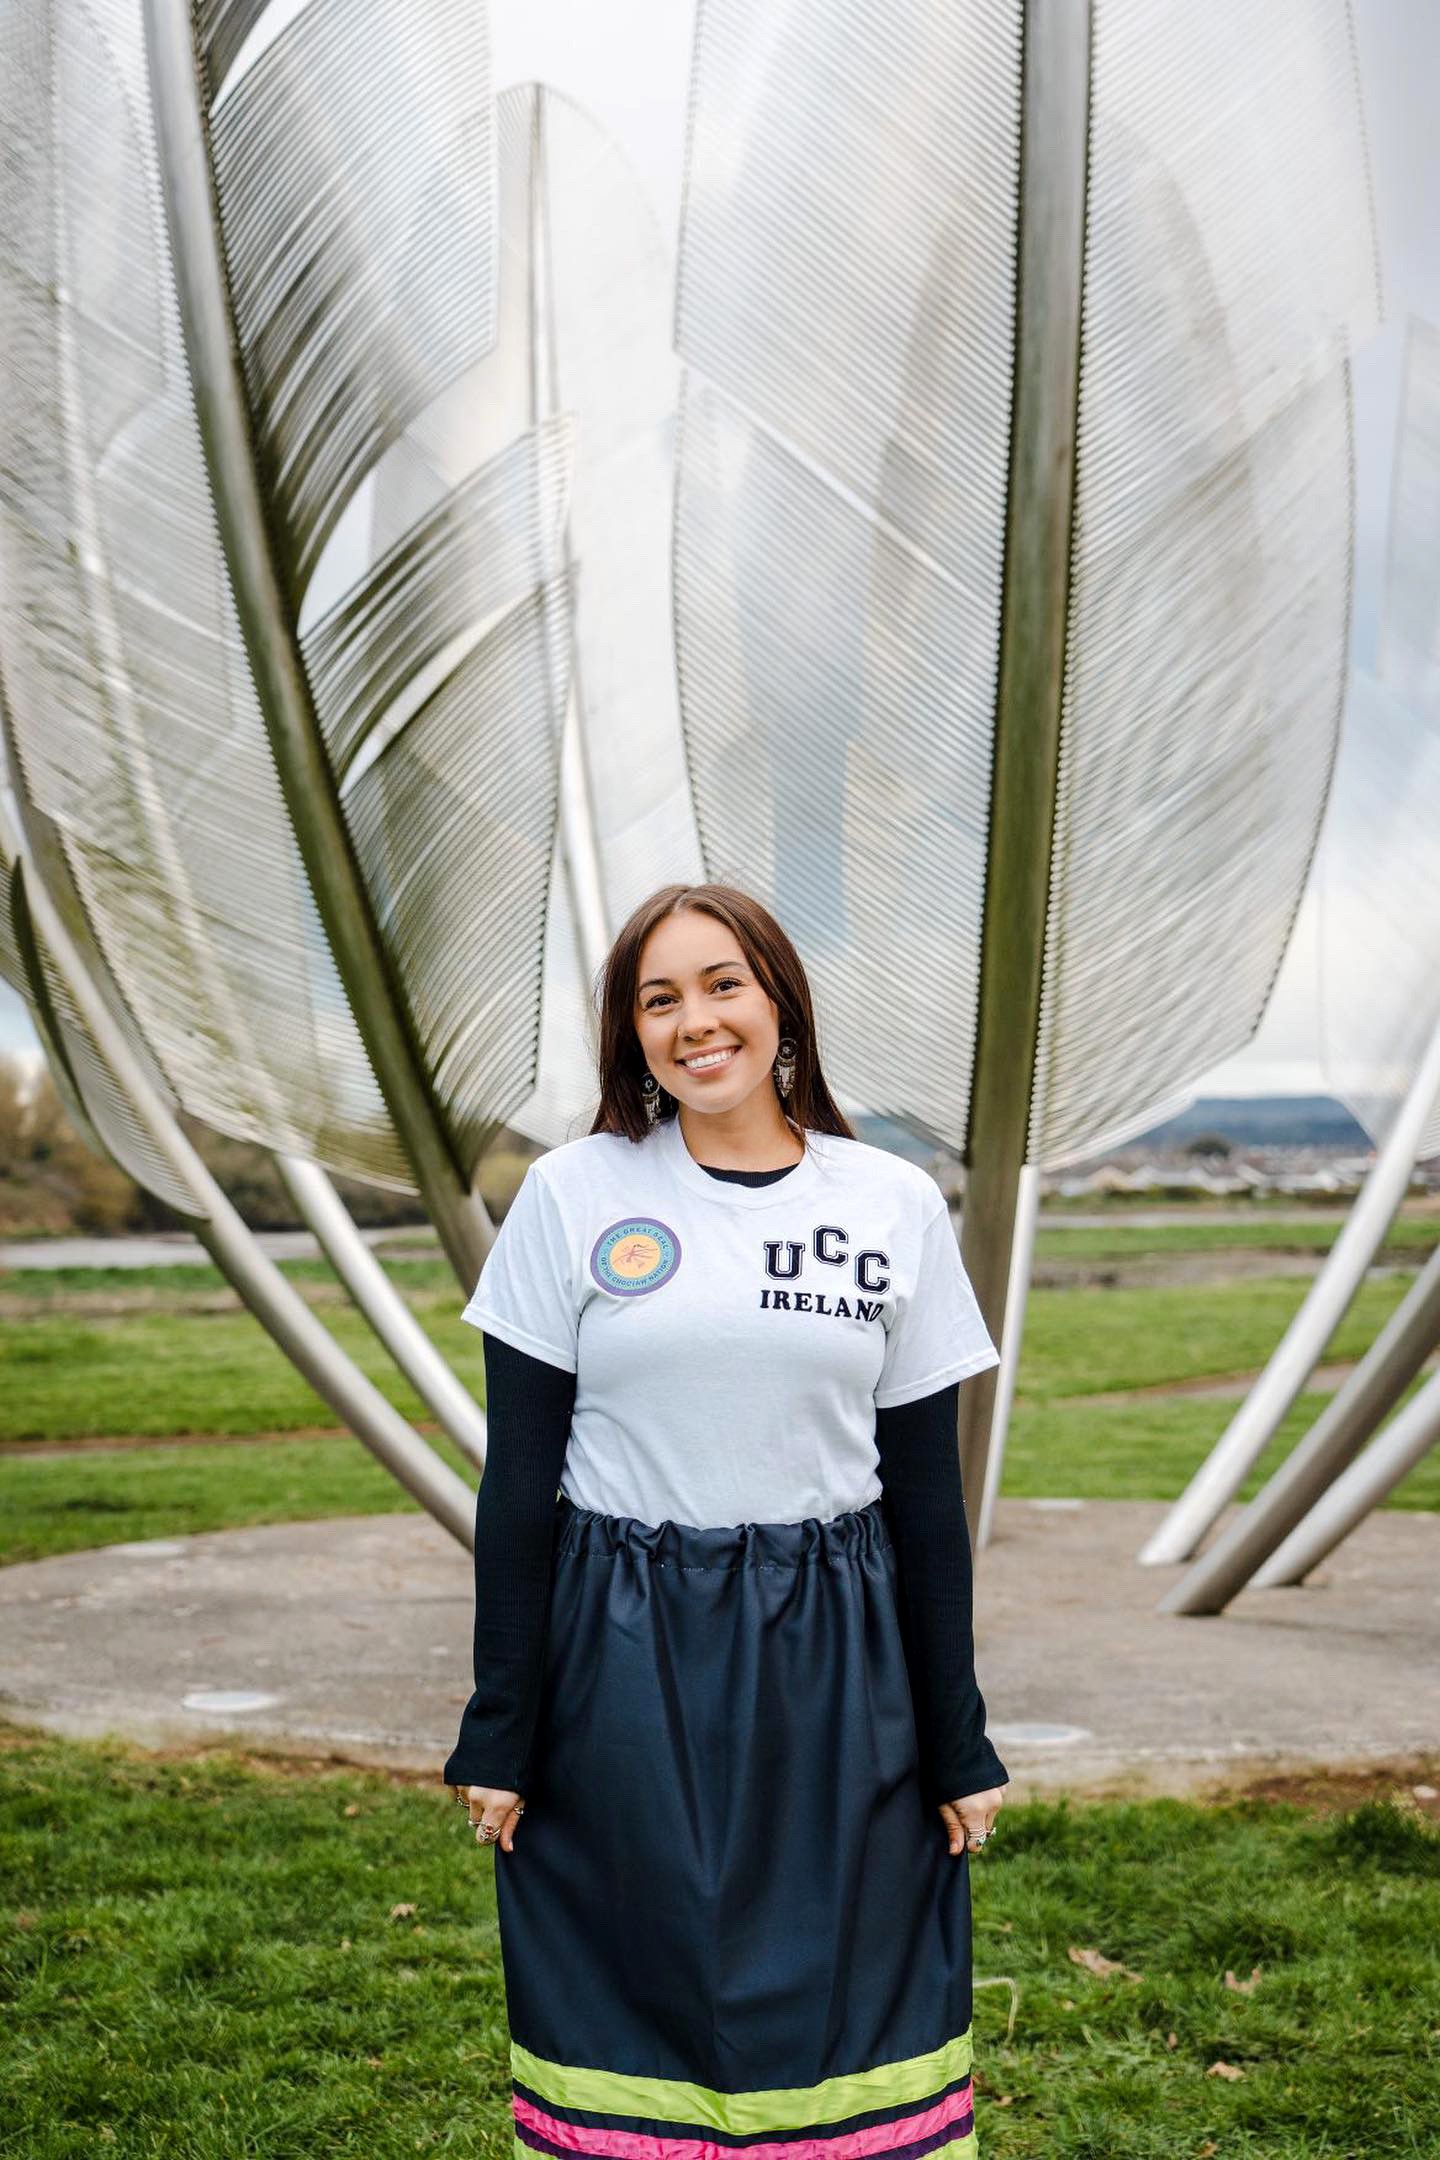 A smiling young female stands in front of a metal sculpture depicting large feathers. She is wearing a white t-shirt emblazoned with the UCC logo and a dark skirt with bright detail at its hem reflecting the Native American Chocktaw Nation.